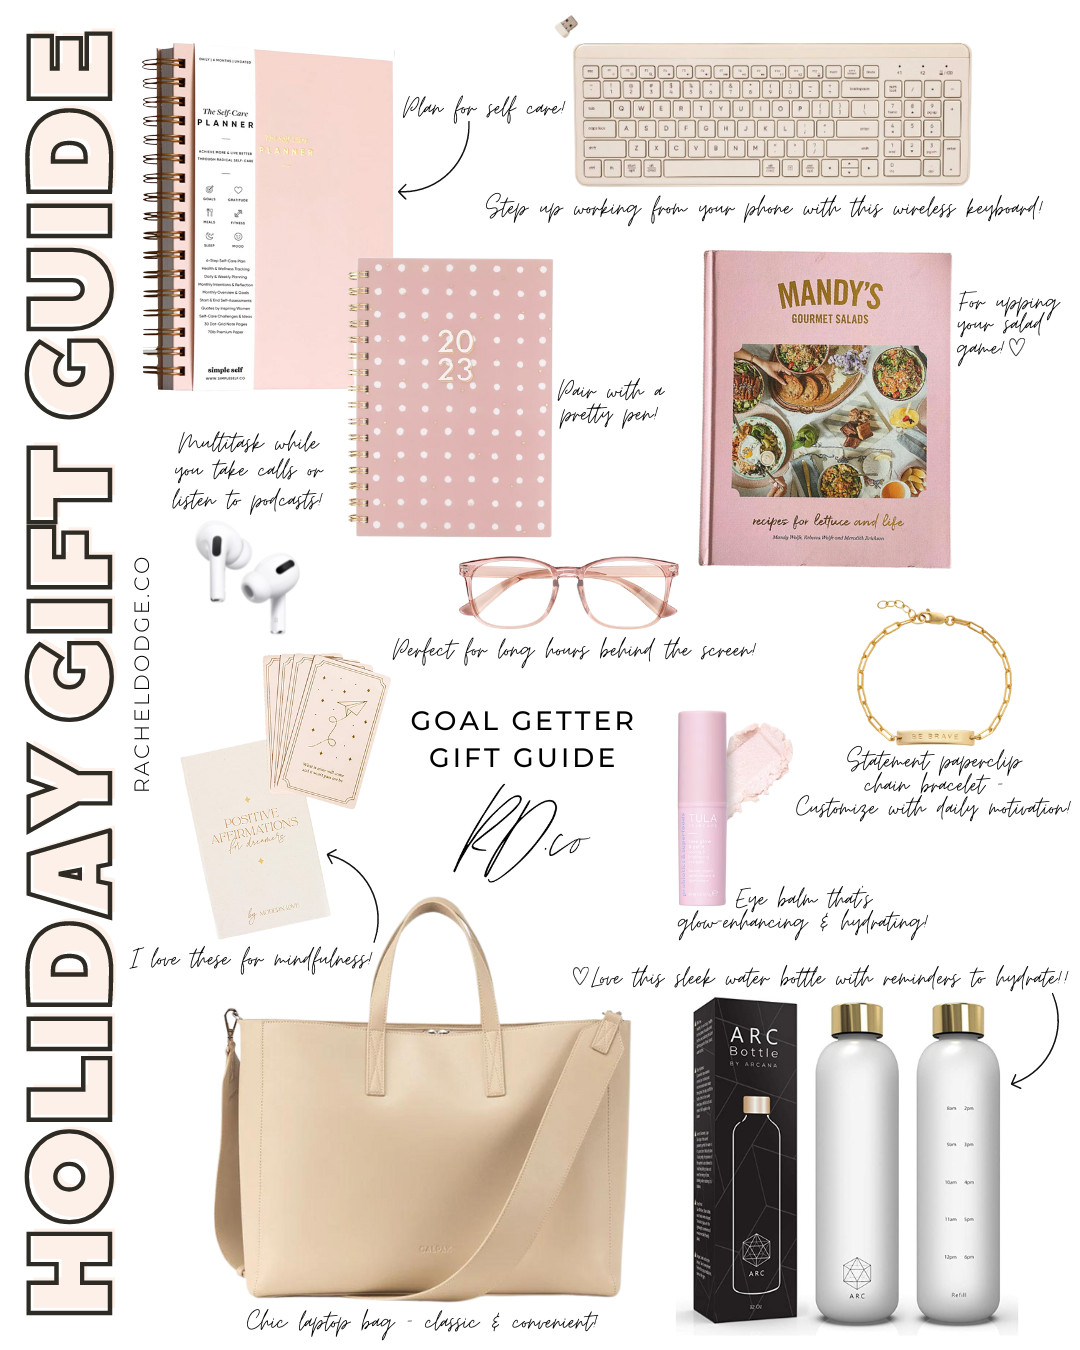 discover gift ideas for the gal getter with our holiday gift guide
